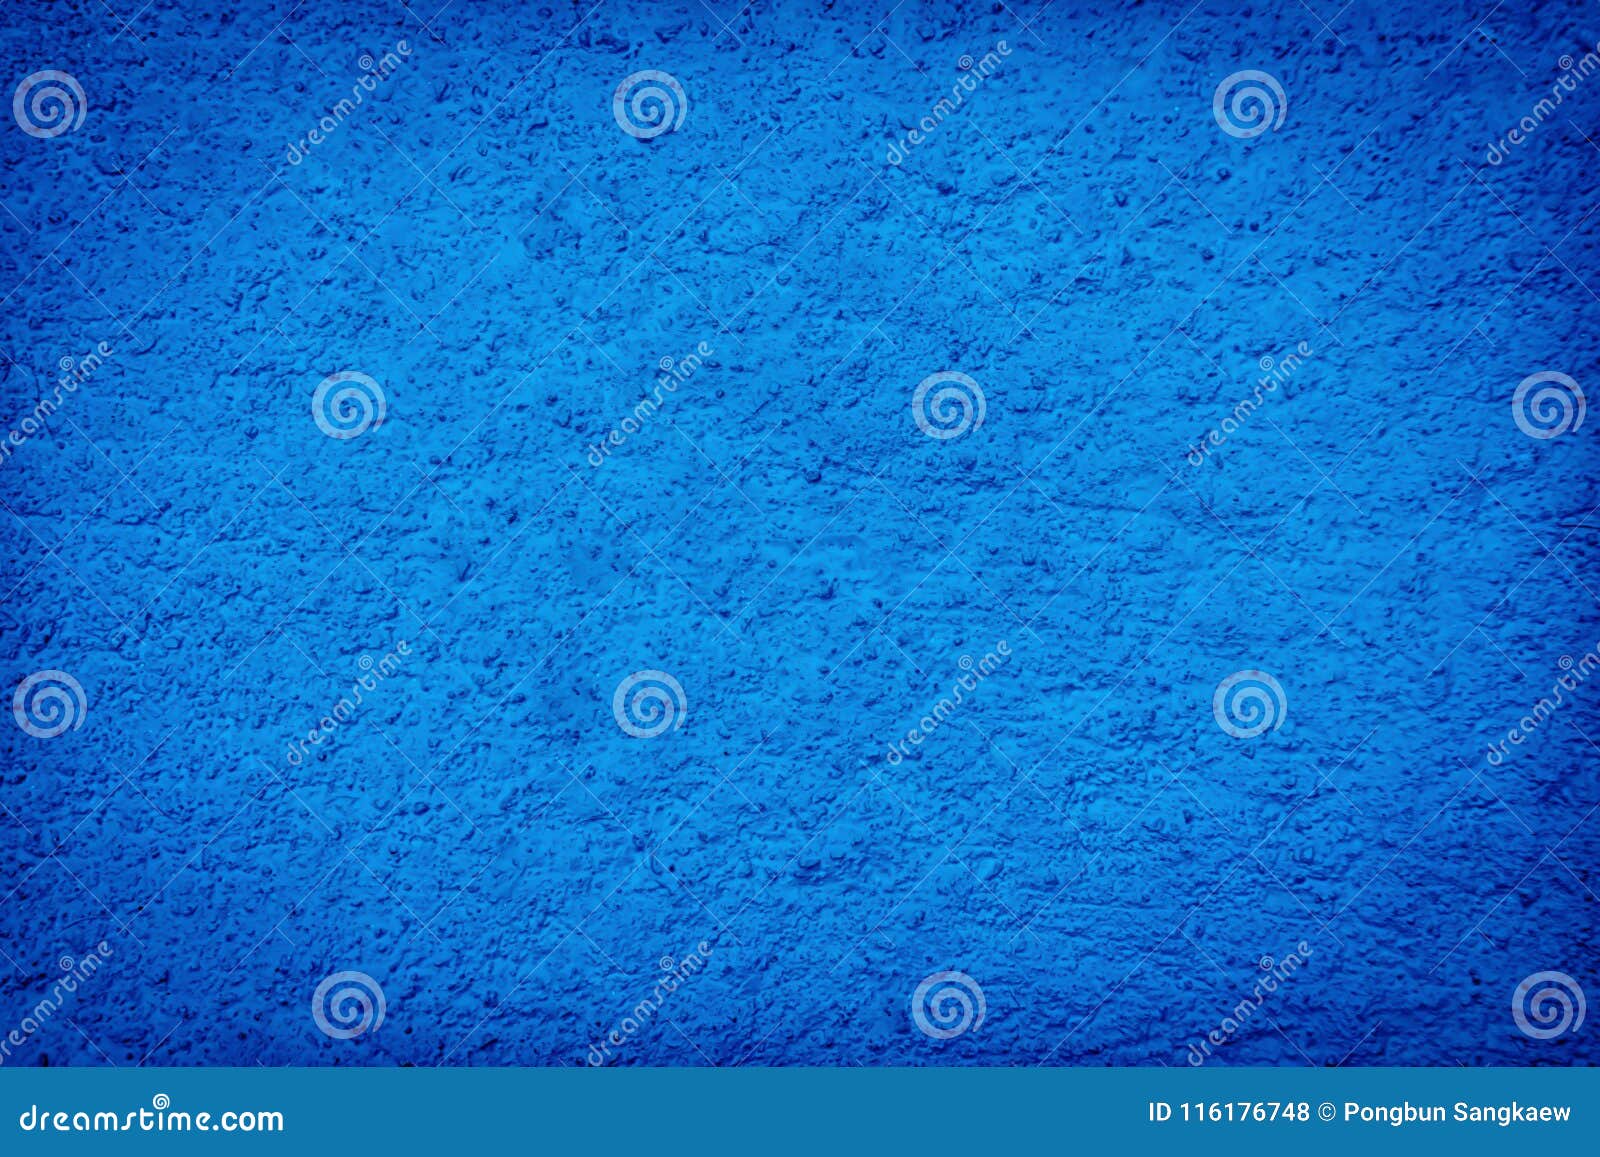 Grunge Blue Vignette Wall Texture Background Stock Photo - Image of ...